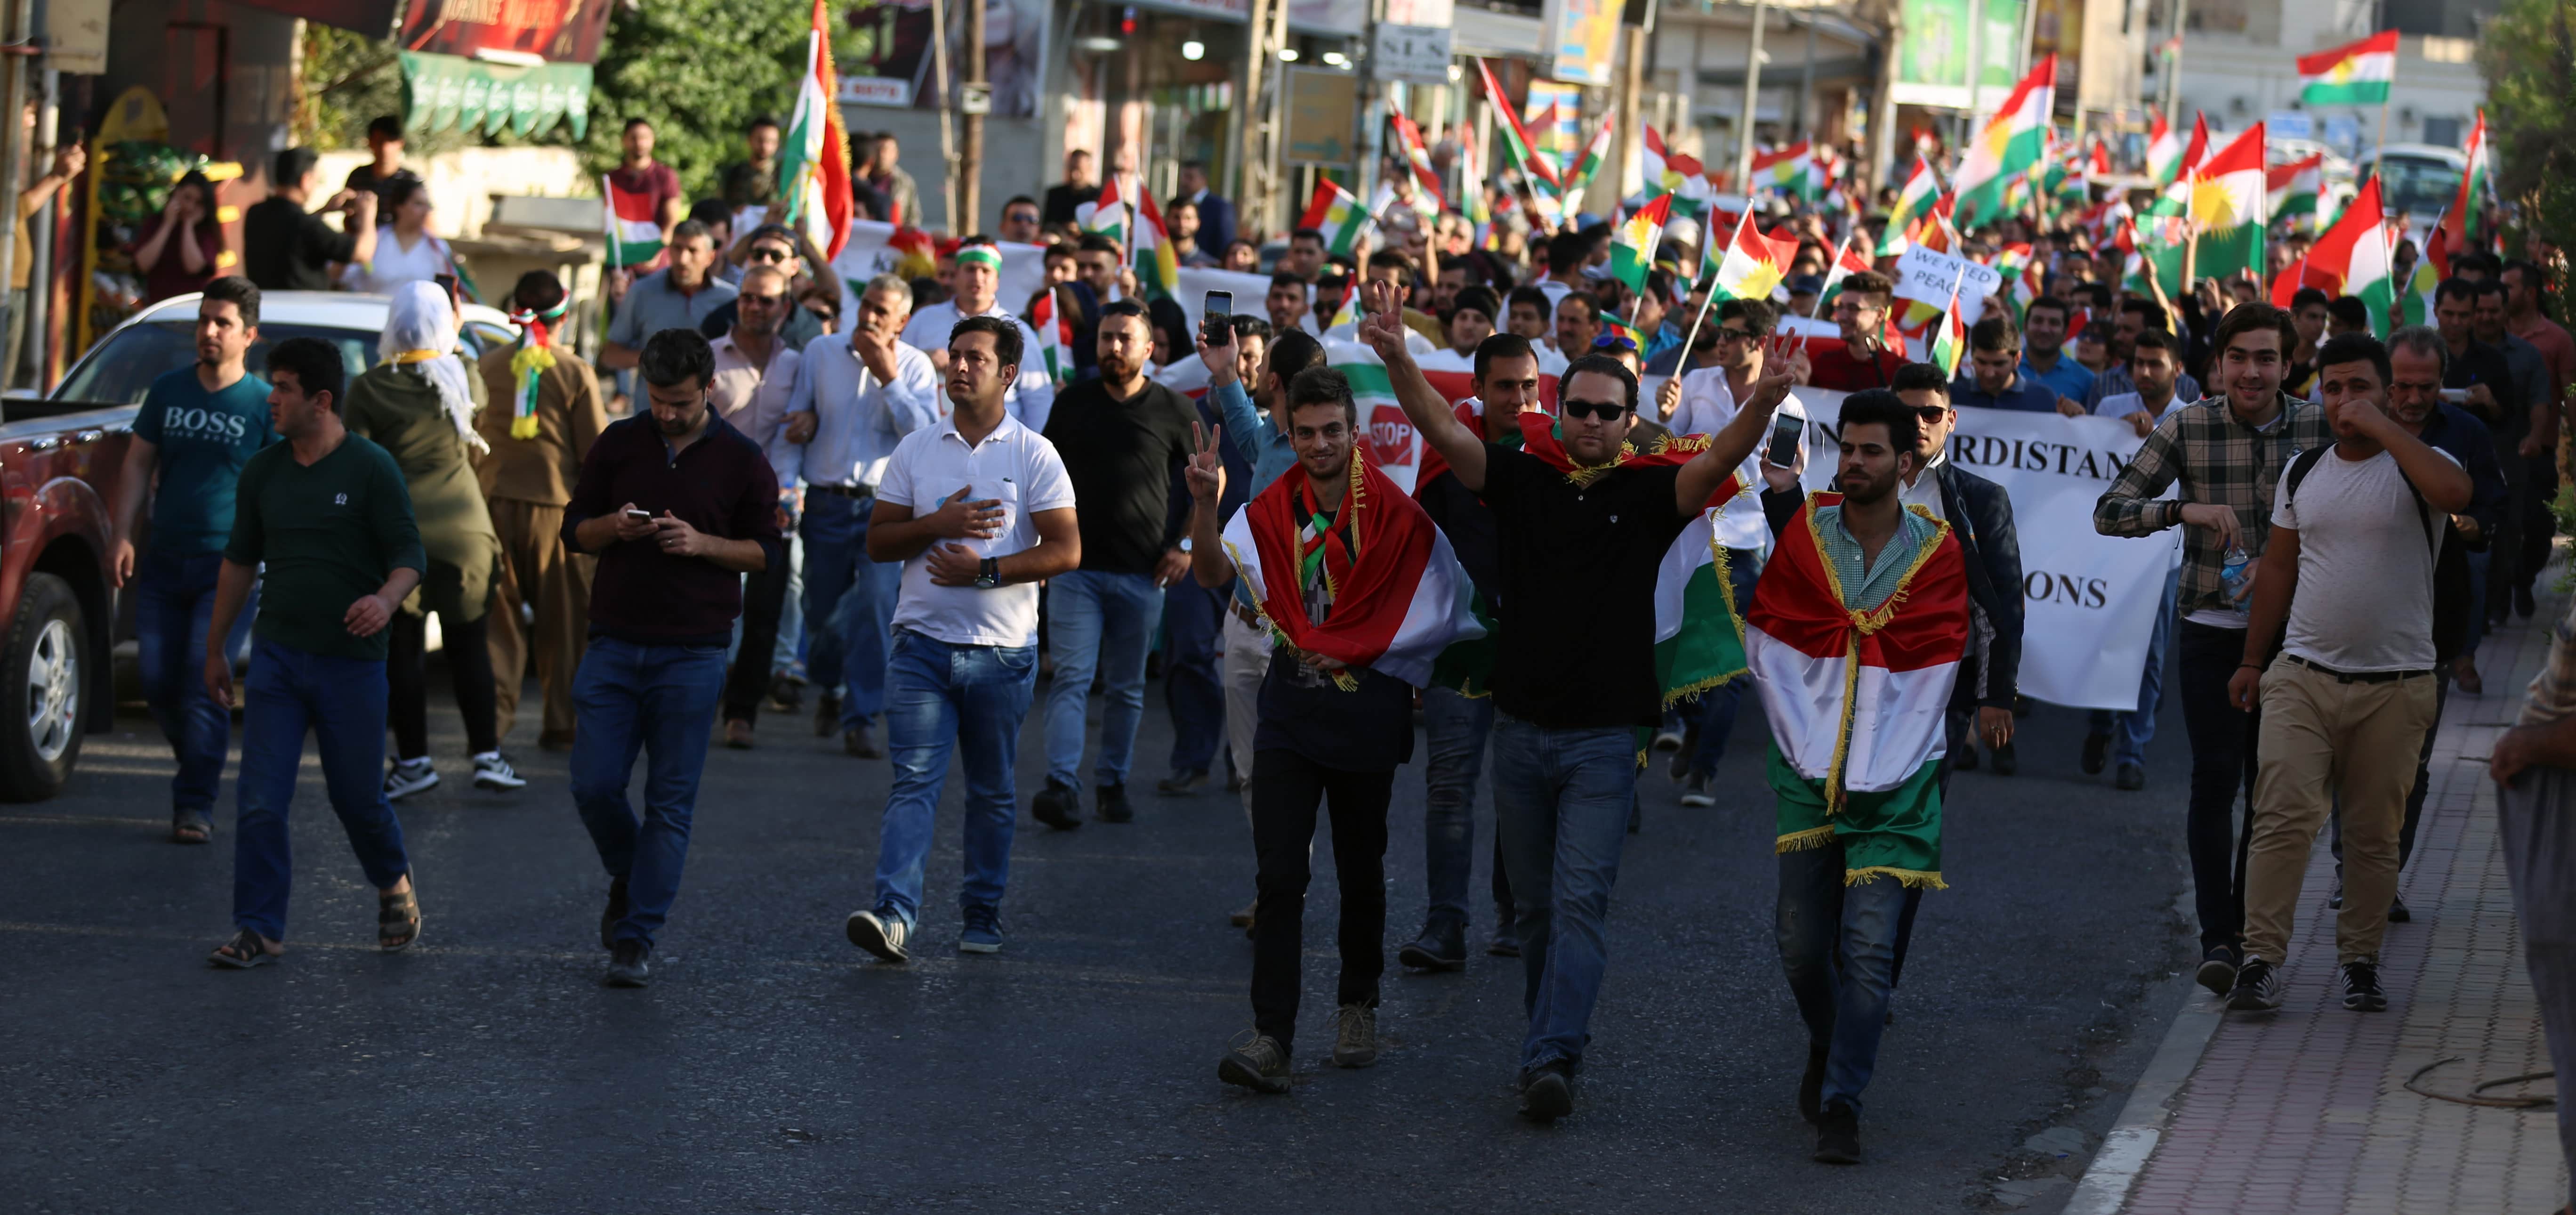 Demonstrators outside the US consulate in Erbil, October 2017 (Photo: Younes Mohammad/Getty Images)